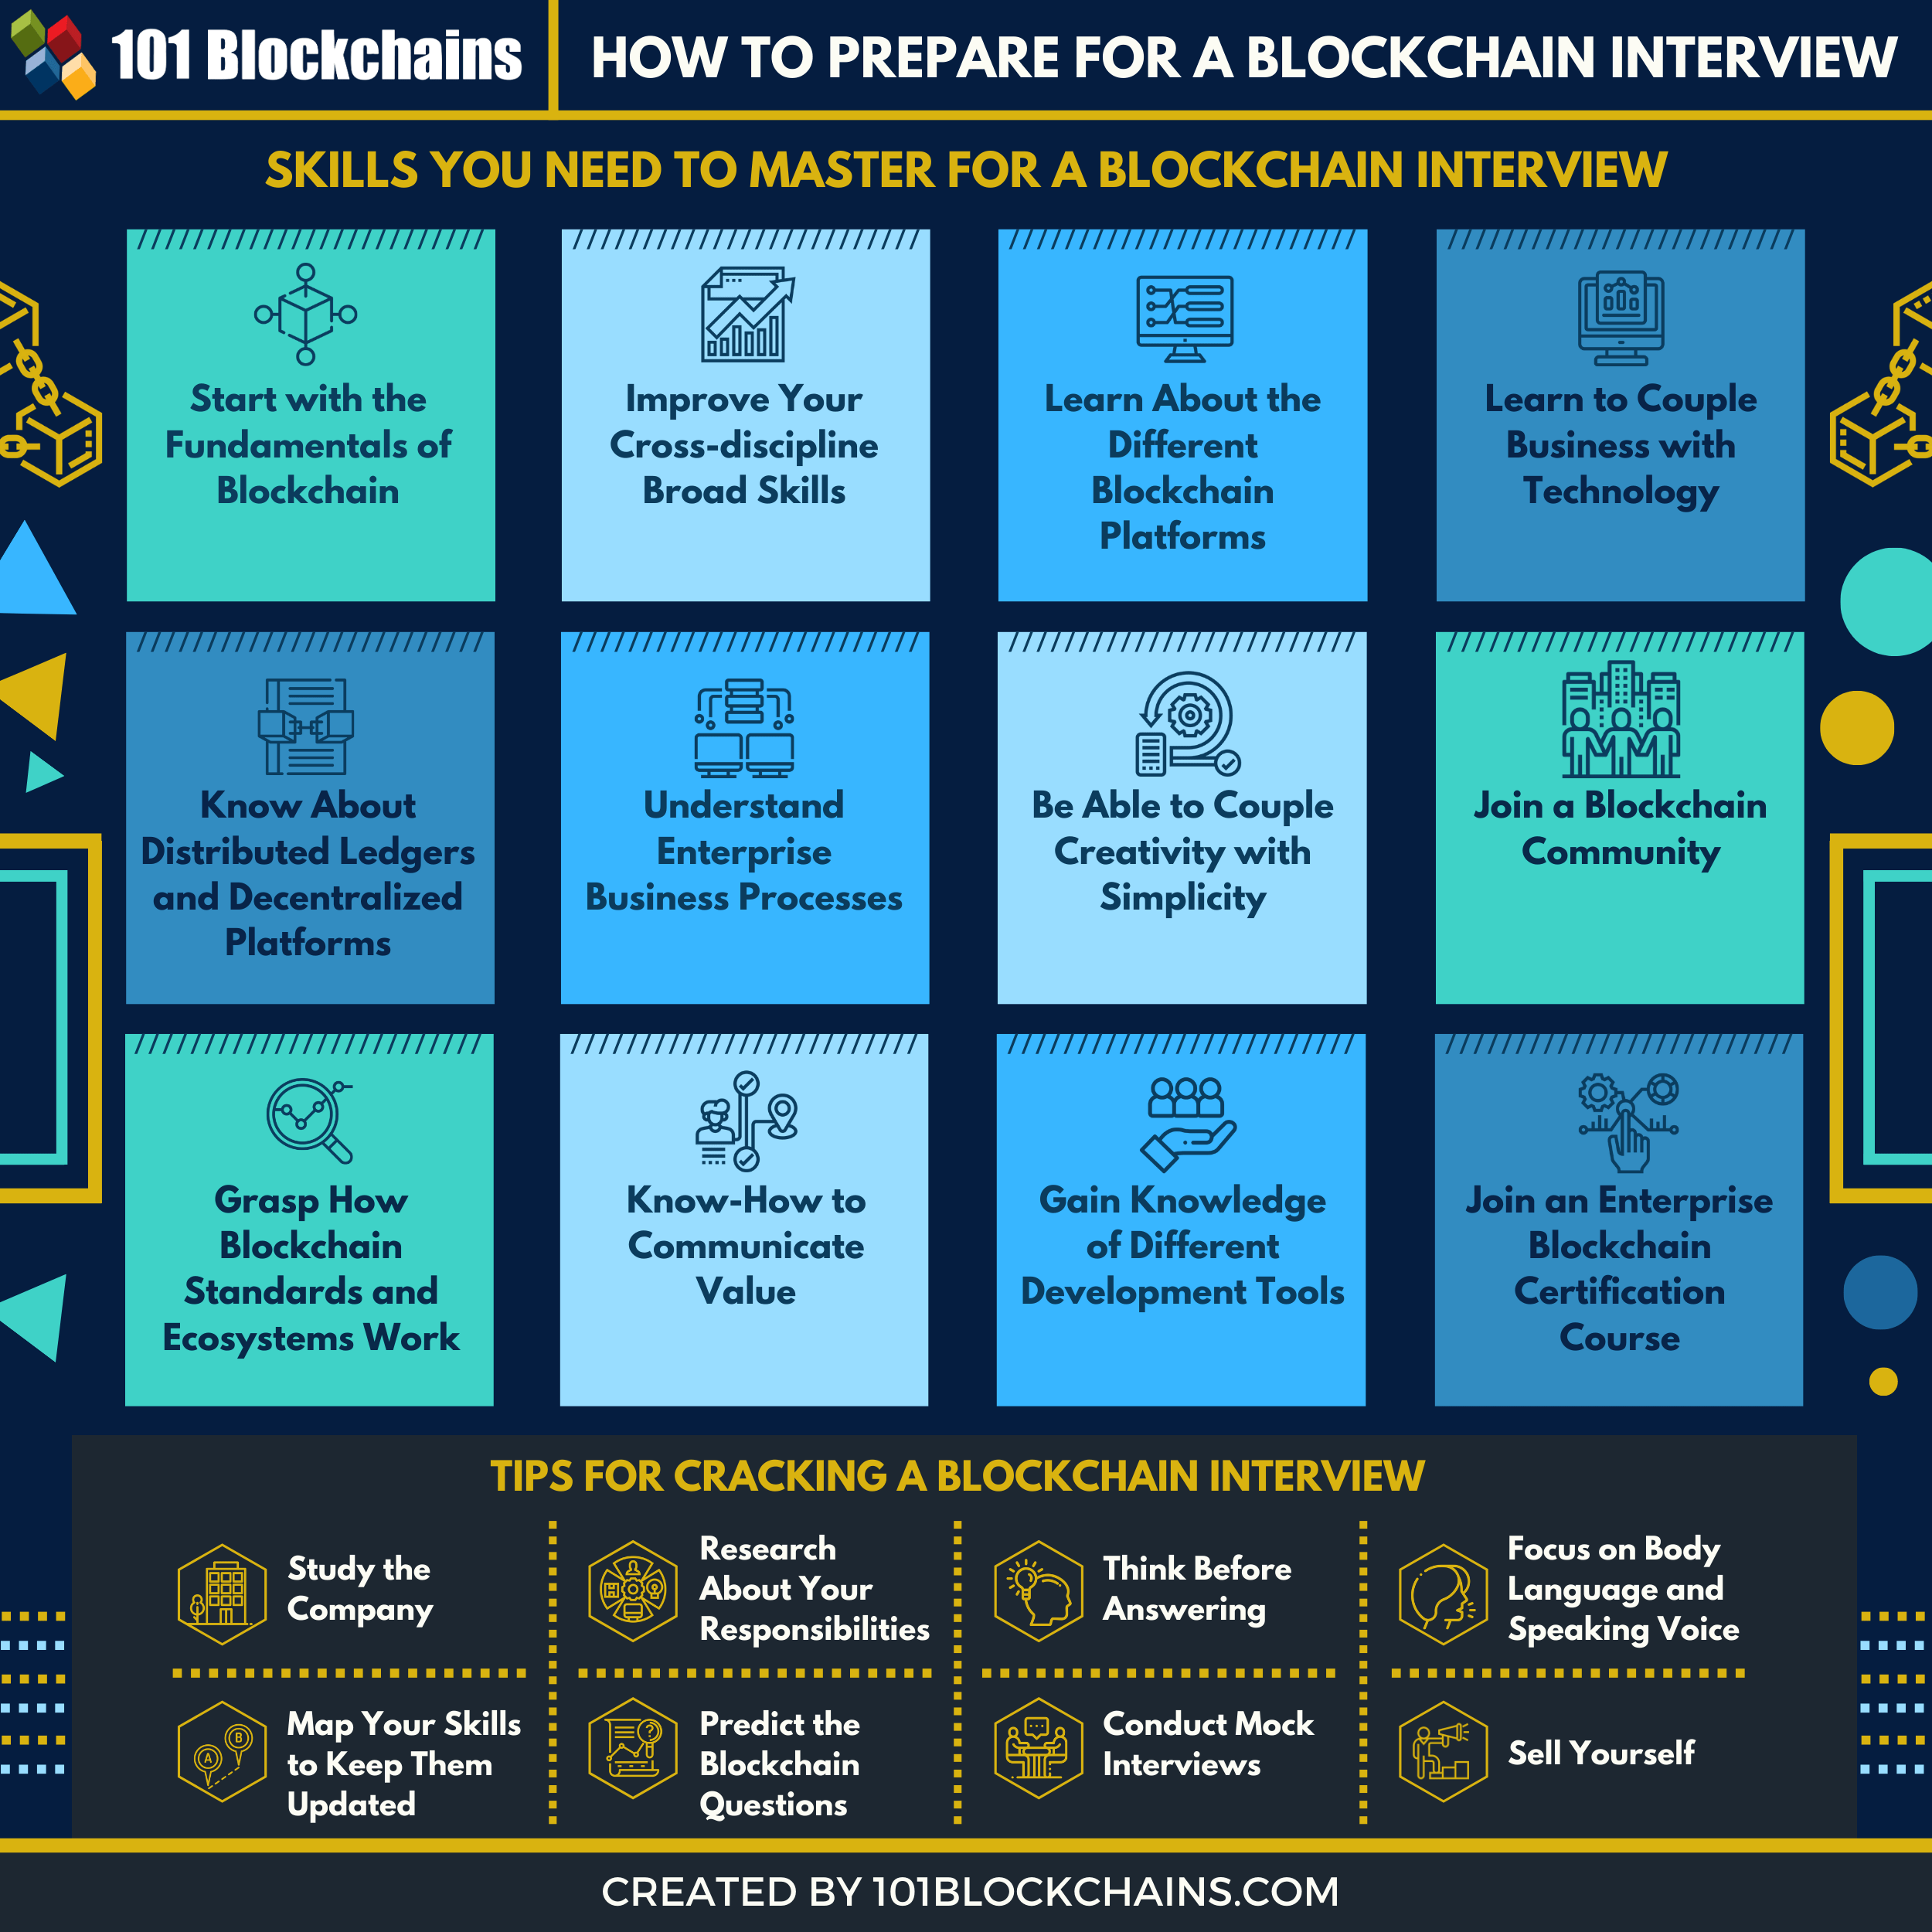 How to prepare for a blockchain interview